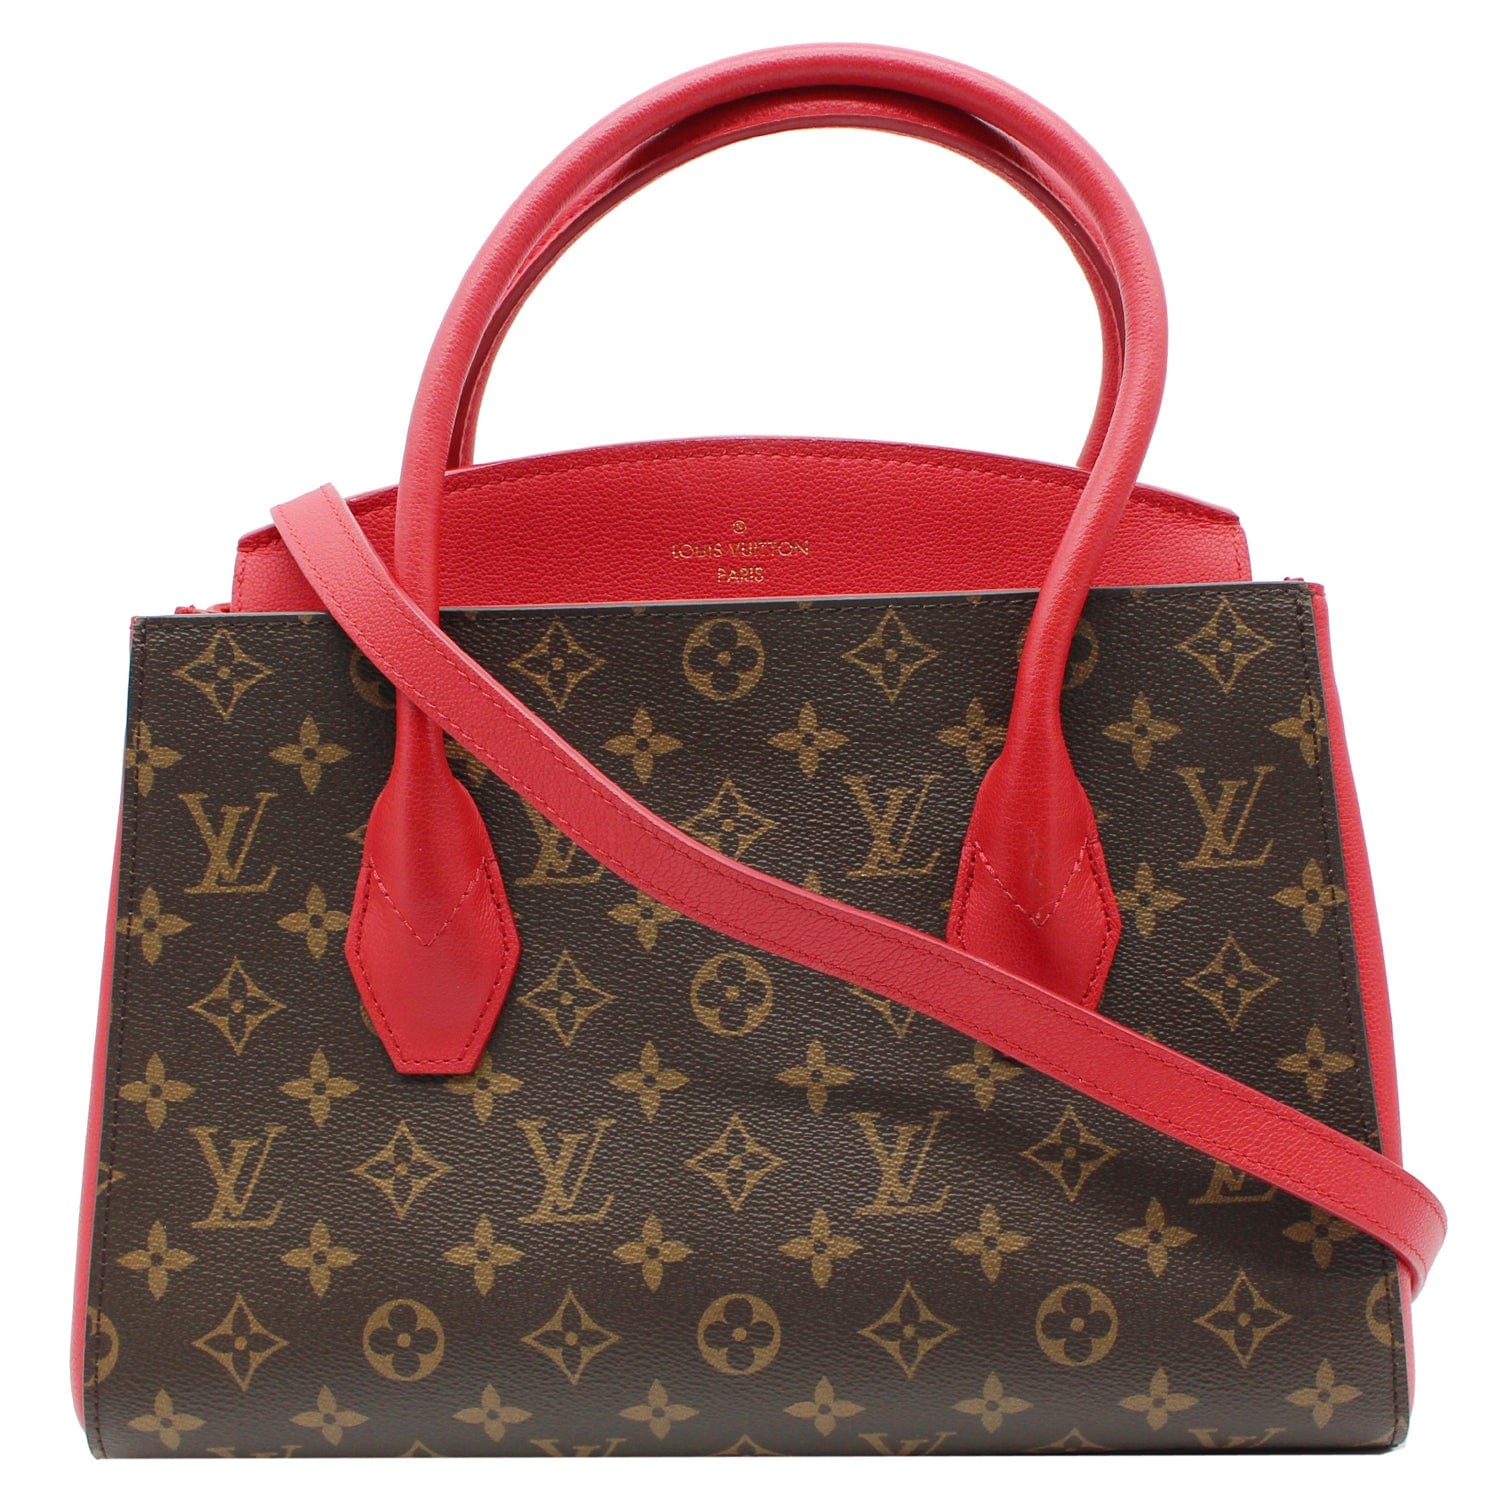 Cleaning and restoring Louis Vuitton brown monogrammed PVC handbags